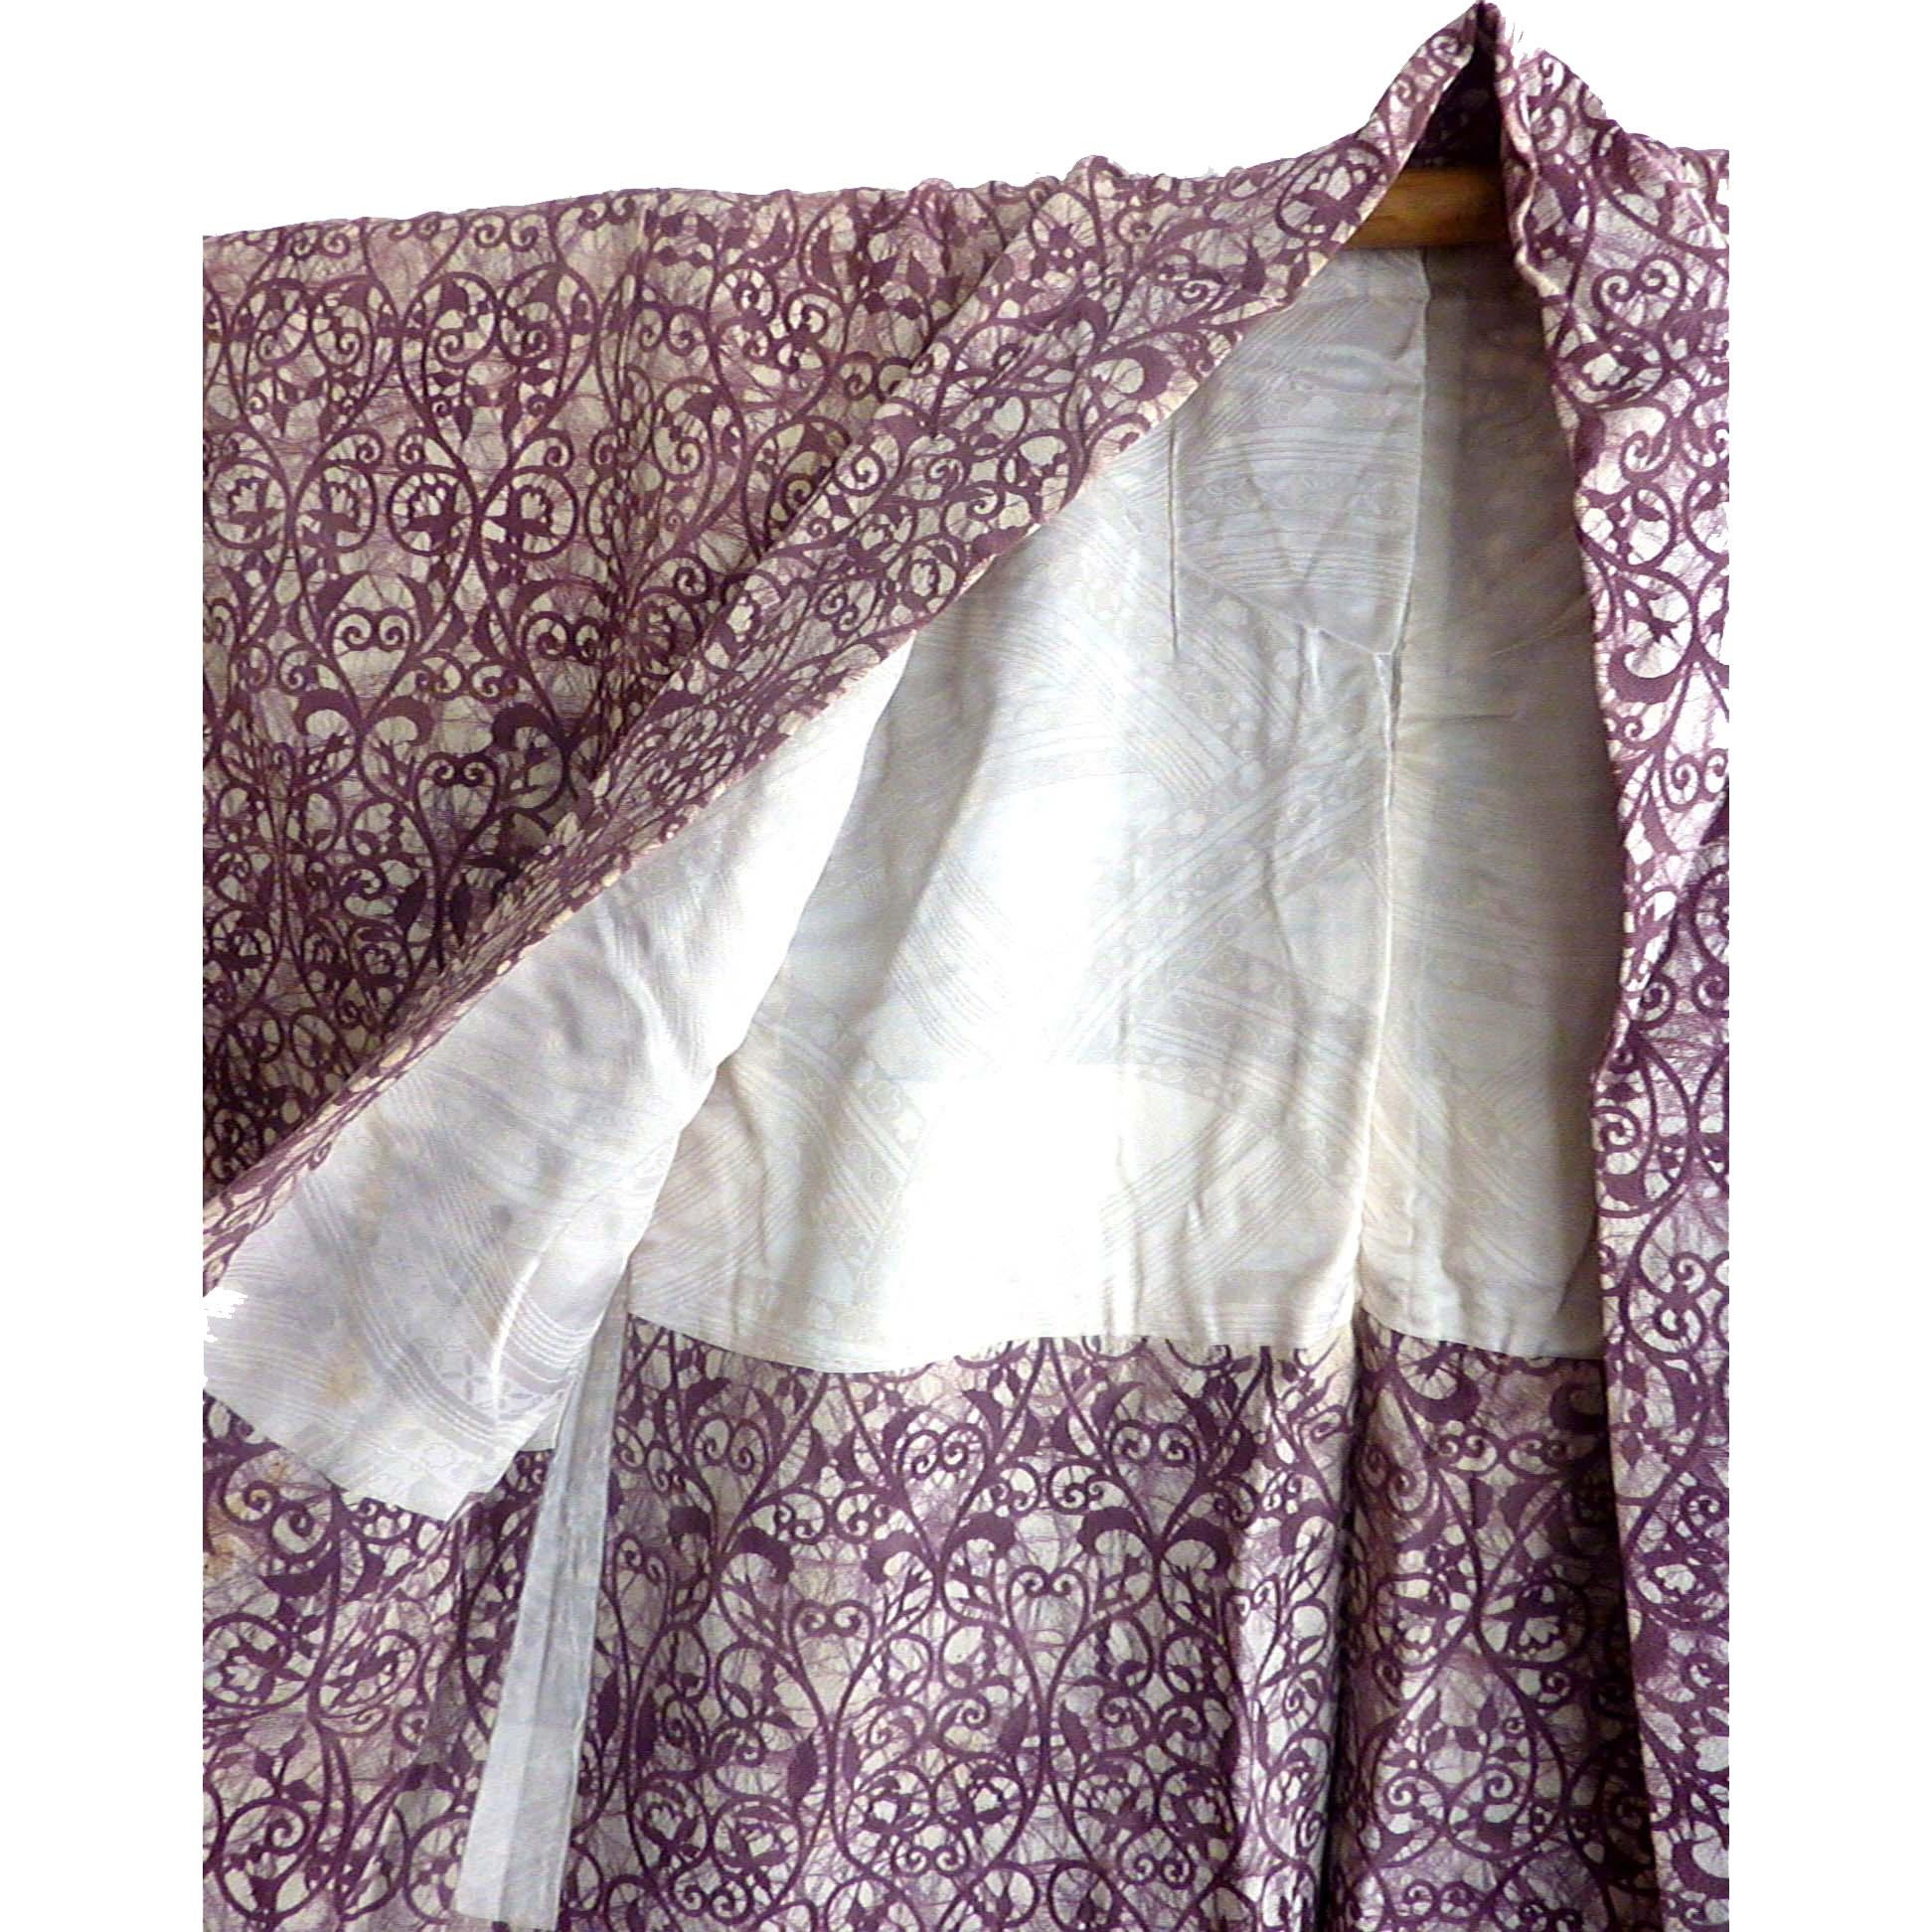 Circa: 1910-1920
Place of Origin: Japan
Material: Silk
Condition: Very good
Gray-ground printed all silk kimono is hand-sewn and handmade in Japan.
Some shading unsure if it's original print design or not.
 
Total length 34